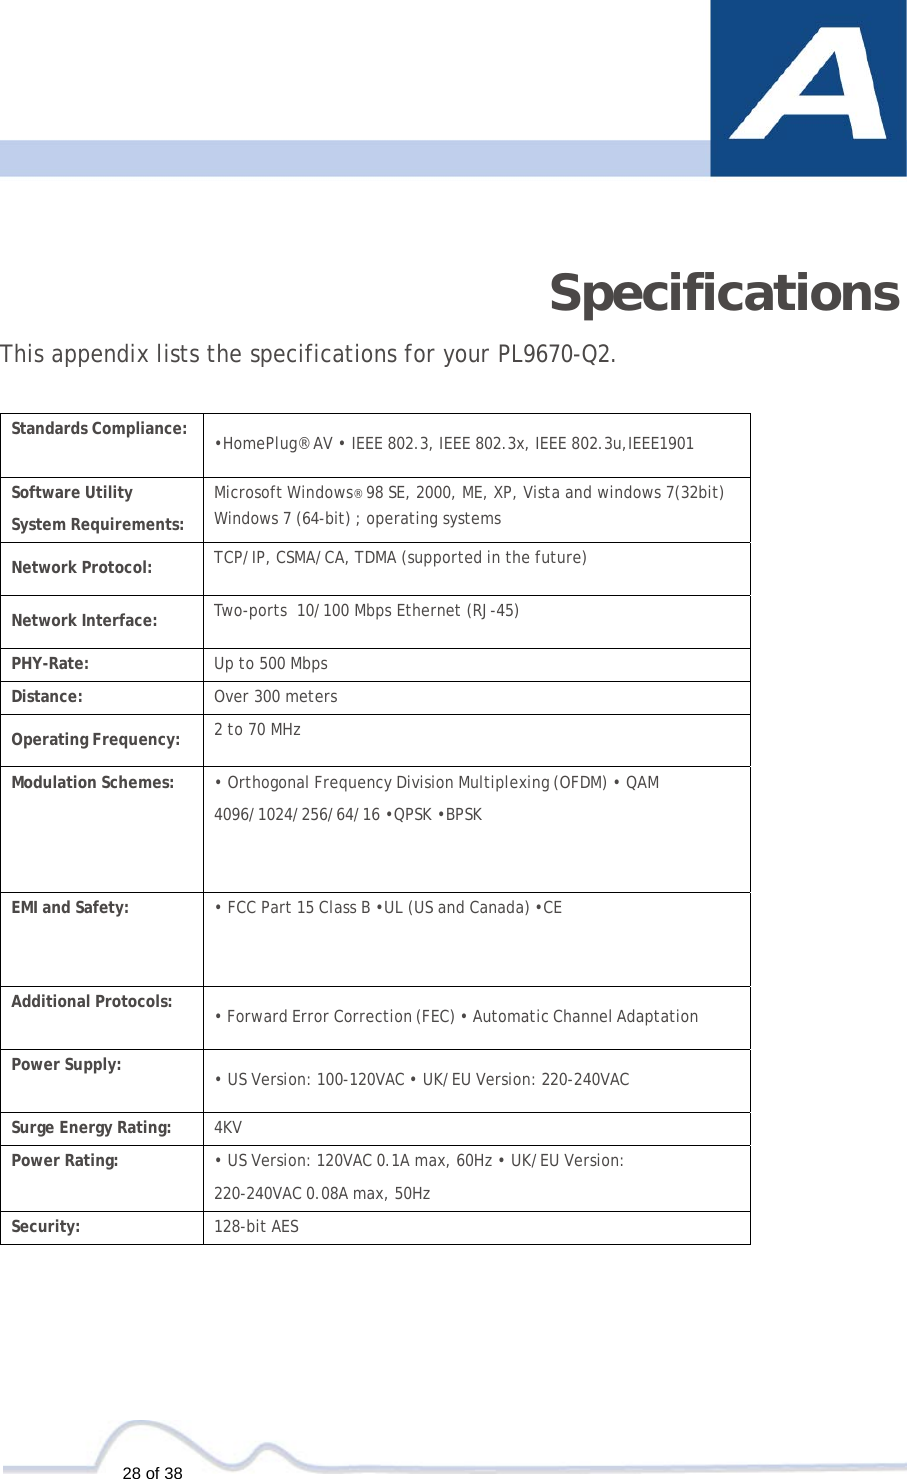    28 of 38        Specifications  This appendix lists the specifications for your PL9670-Q2.   Standards Compliance: •HomePlug® AV • IEEE 802.3, IEEE 802.3x, IEEE 802.3u,IEEE1901 Software Utility  System Requirements: Microsoft Windows® 98 SE, 2000, ME, XP, Vista and windows 7(32bit)  Windows 7 (64-bit) ; operating systems  Network Protocol: TCP/IP, CSMA/CA, TDMA (supported in the future) Network Interface: Two-ports  10/100 Mbps Ethernet (RJ-45)PHY-Rate:  Up to 500 Mbps Distance: Over 300 meters Operating Frequency: 2 to 70 MHz Modulation Schemes: • Orthogonal Frequency Division Multiplexing (OFDM) • QAM  4096/1024/256/64/16 •QPSK •BPSK EMI and Safety: • FCC Part 15 Class B •UL (US and Canada) •CEAdditional Protocols: • Forward Error Correction (FEC) • Automatic Channel Adaptation Power Supply: • US Version: 100-120VAC • UK/EU Version: 220-240VAC Surge Energy Rating: 4KV Power Rating: • US Version: 120VAC 0.1A max, 60Hz • UK/EU Version:  220-240VAC 0.08A max, 50Hz Security: 128-bit AES 